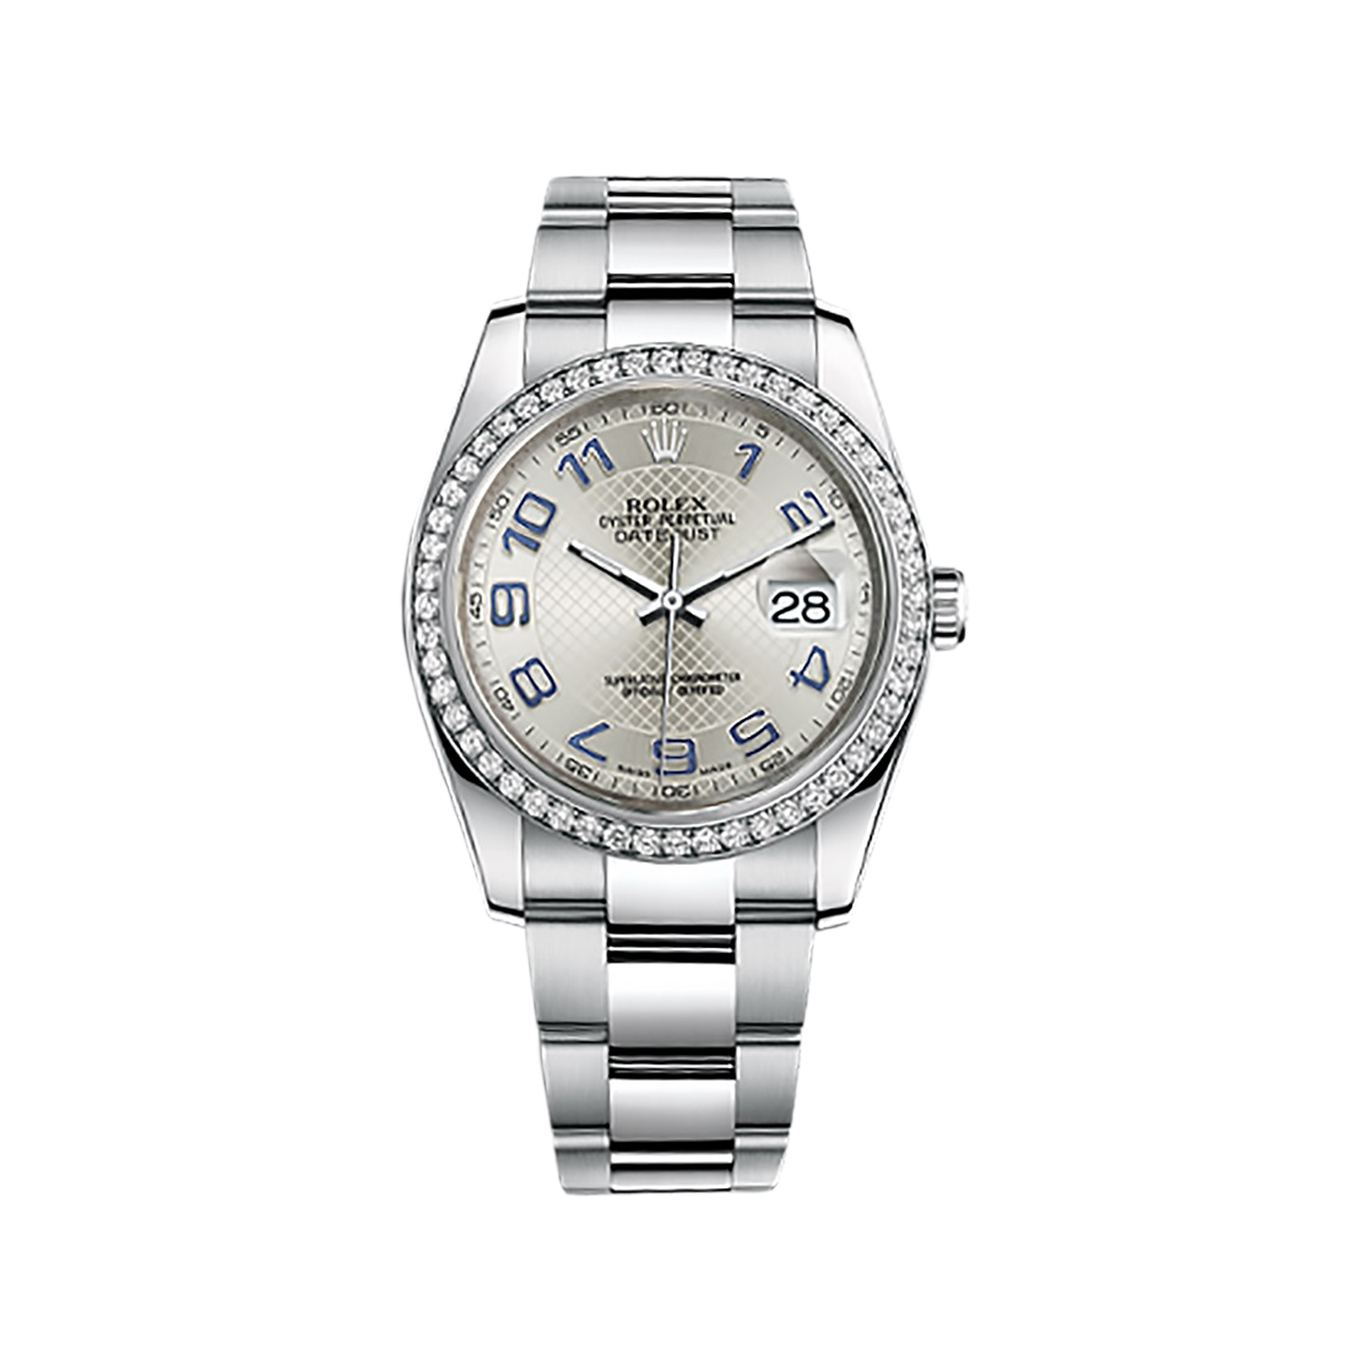 Datejust 36 116244 White Gold & Stainless Steel Watch (Silver) - Click Image to Close